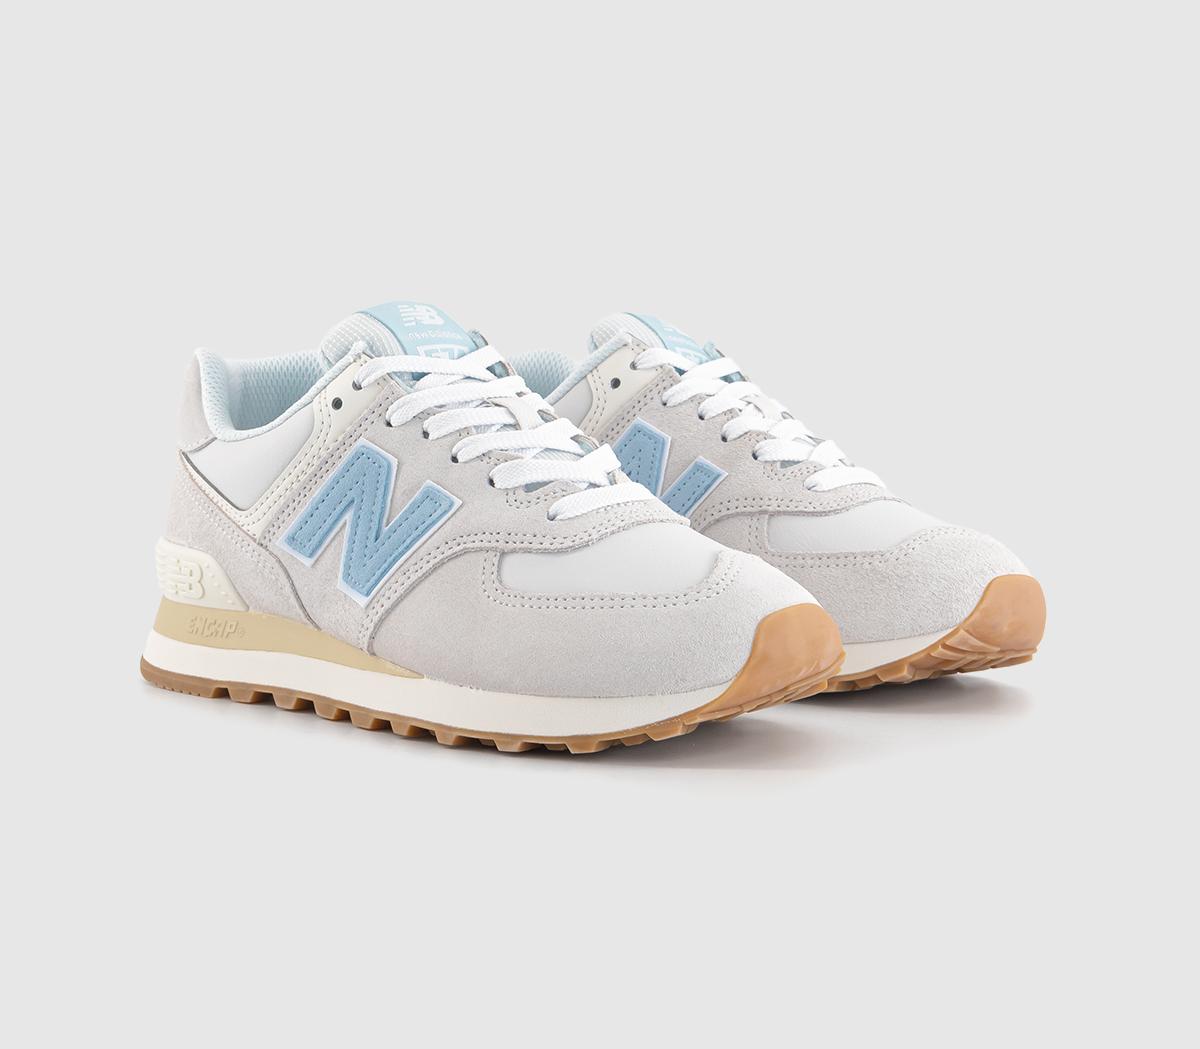 New Balance Mens 574 Trainers Reflection Natural, 6.5